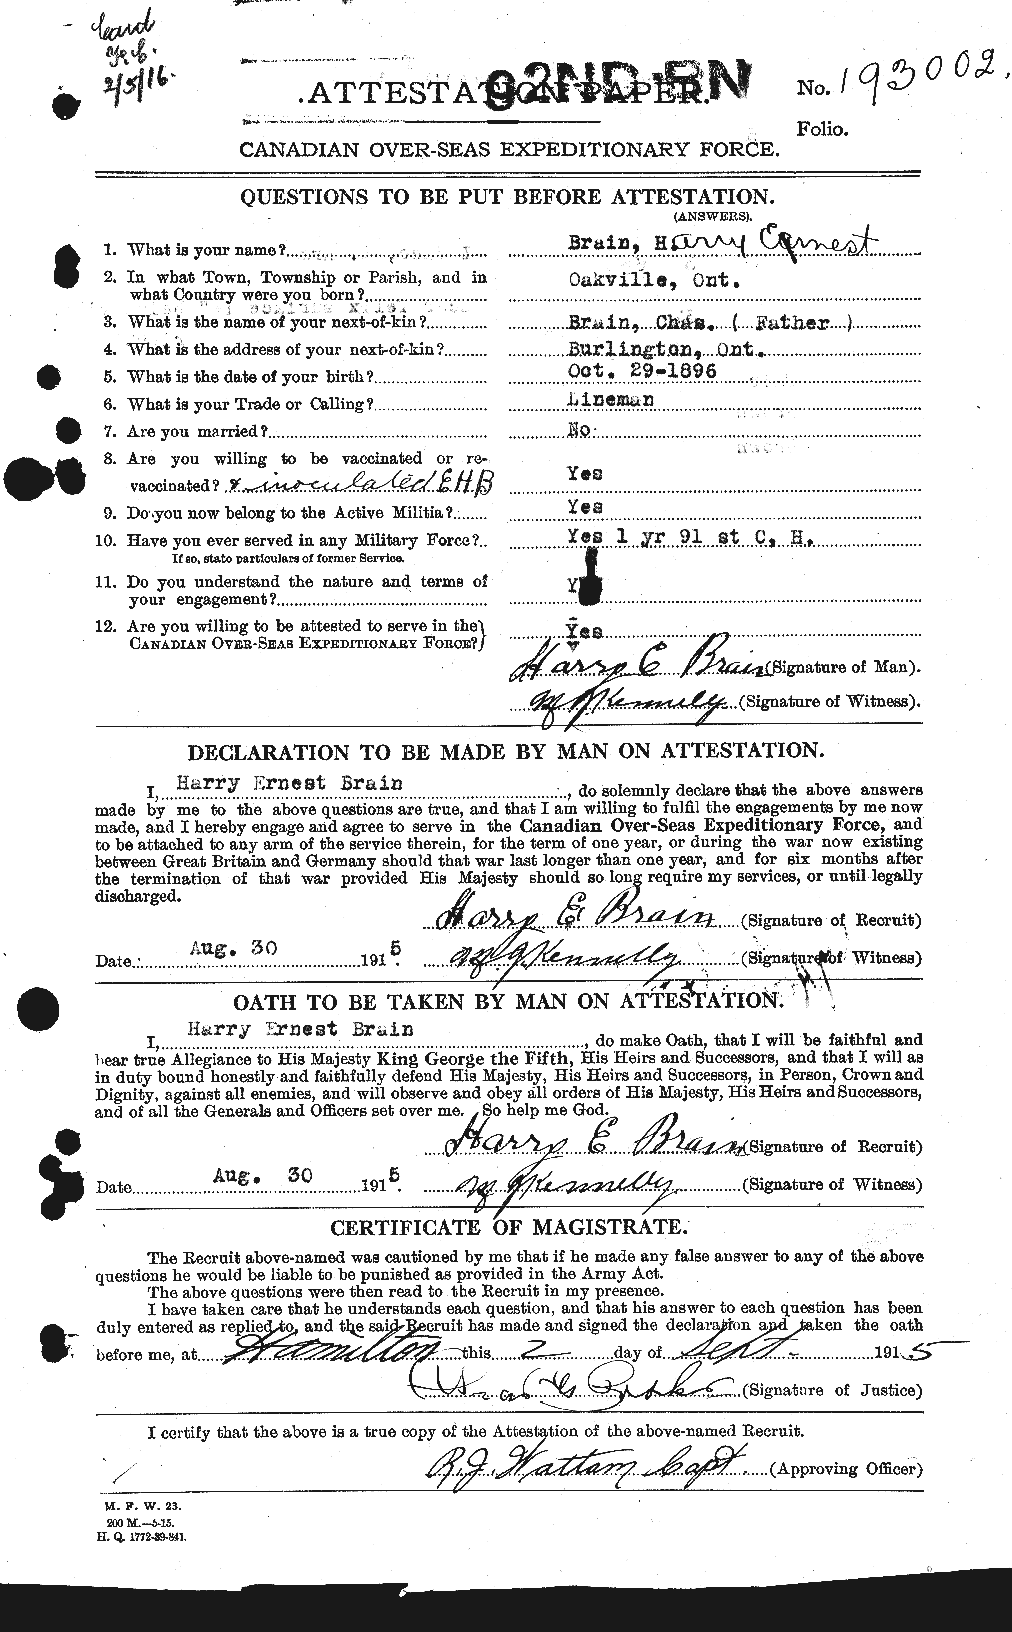 Personnel Records of the First World War - CEF 257383a